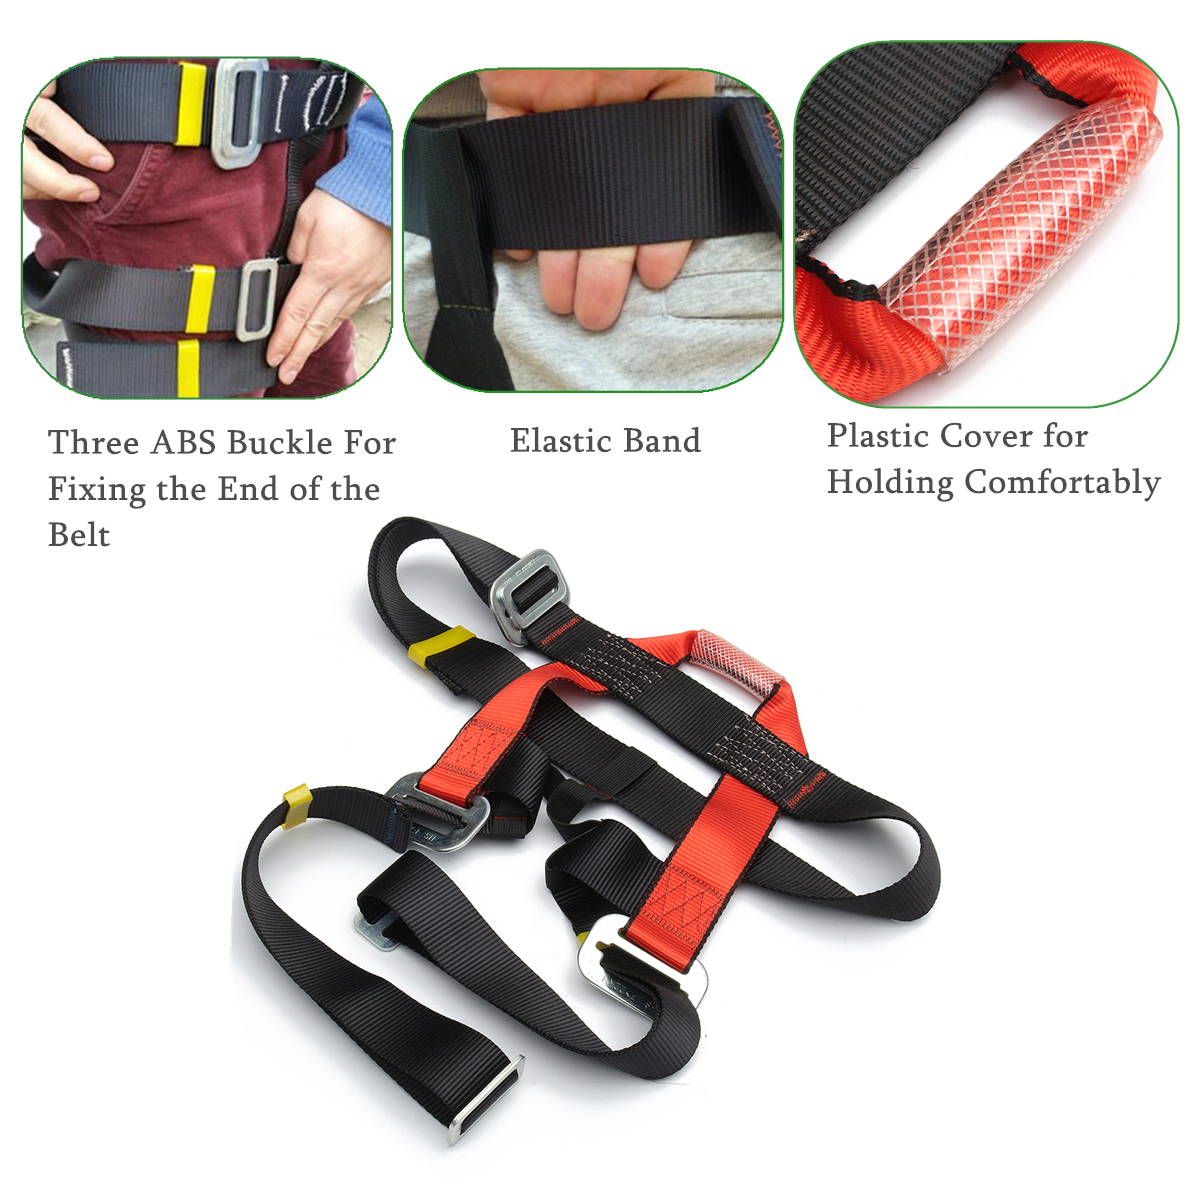 Outdoor-Mountain-Rock-Climbing-Rappelling-Harness-Bust-Belt-Rescue-Safety-Seat-Sitting-Strap-1130415-3